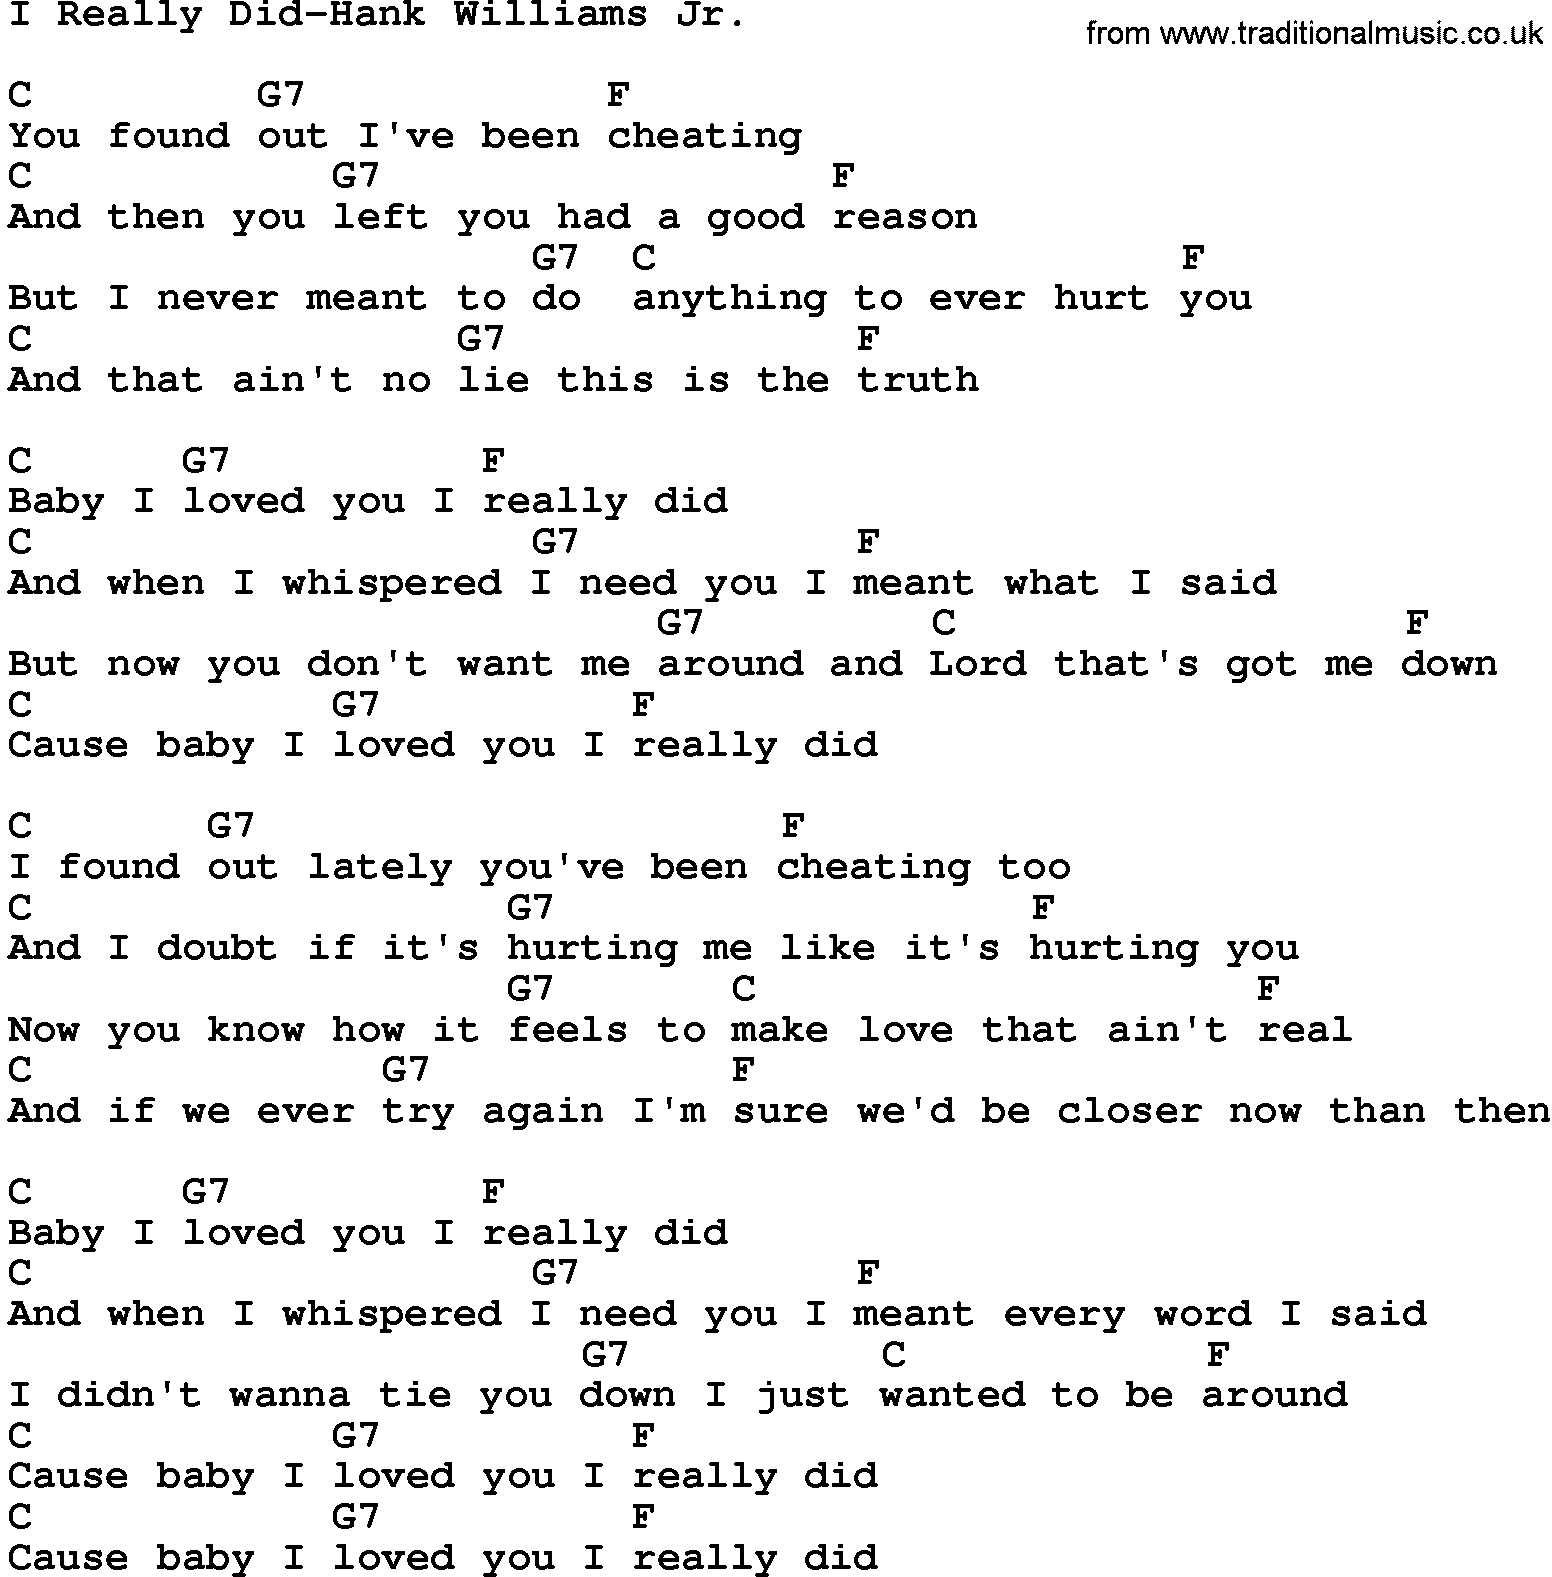 Country music song: I Really Did-Hank Williams Jr lyrics and chords